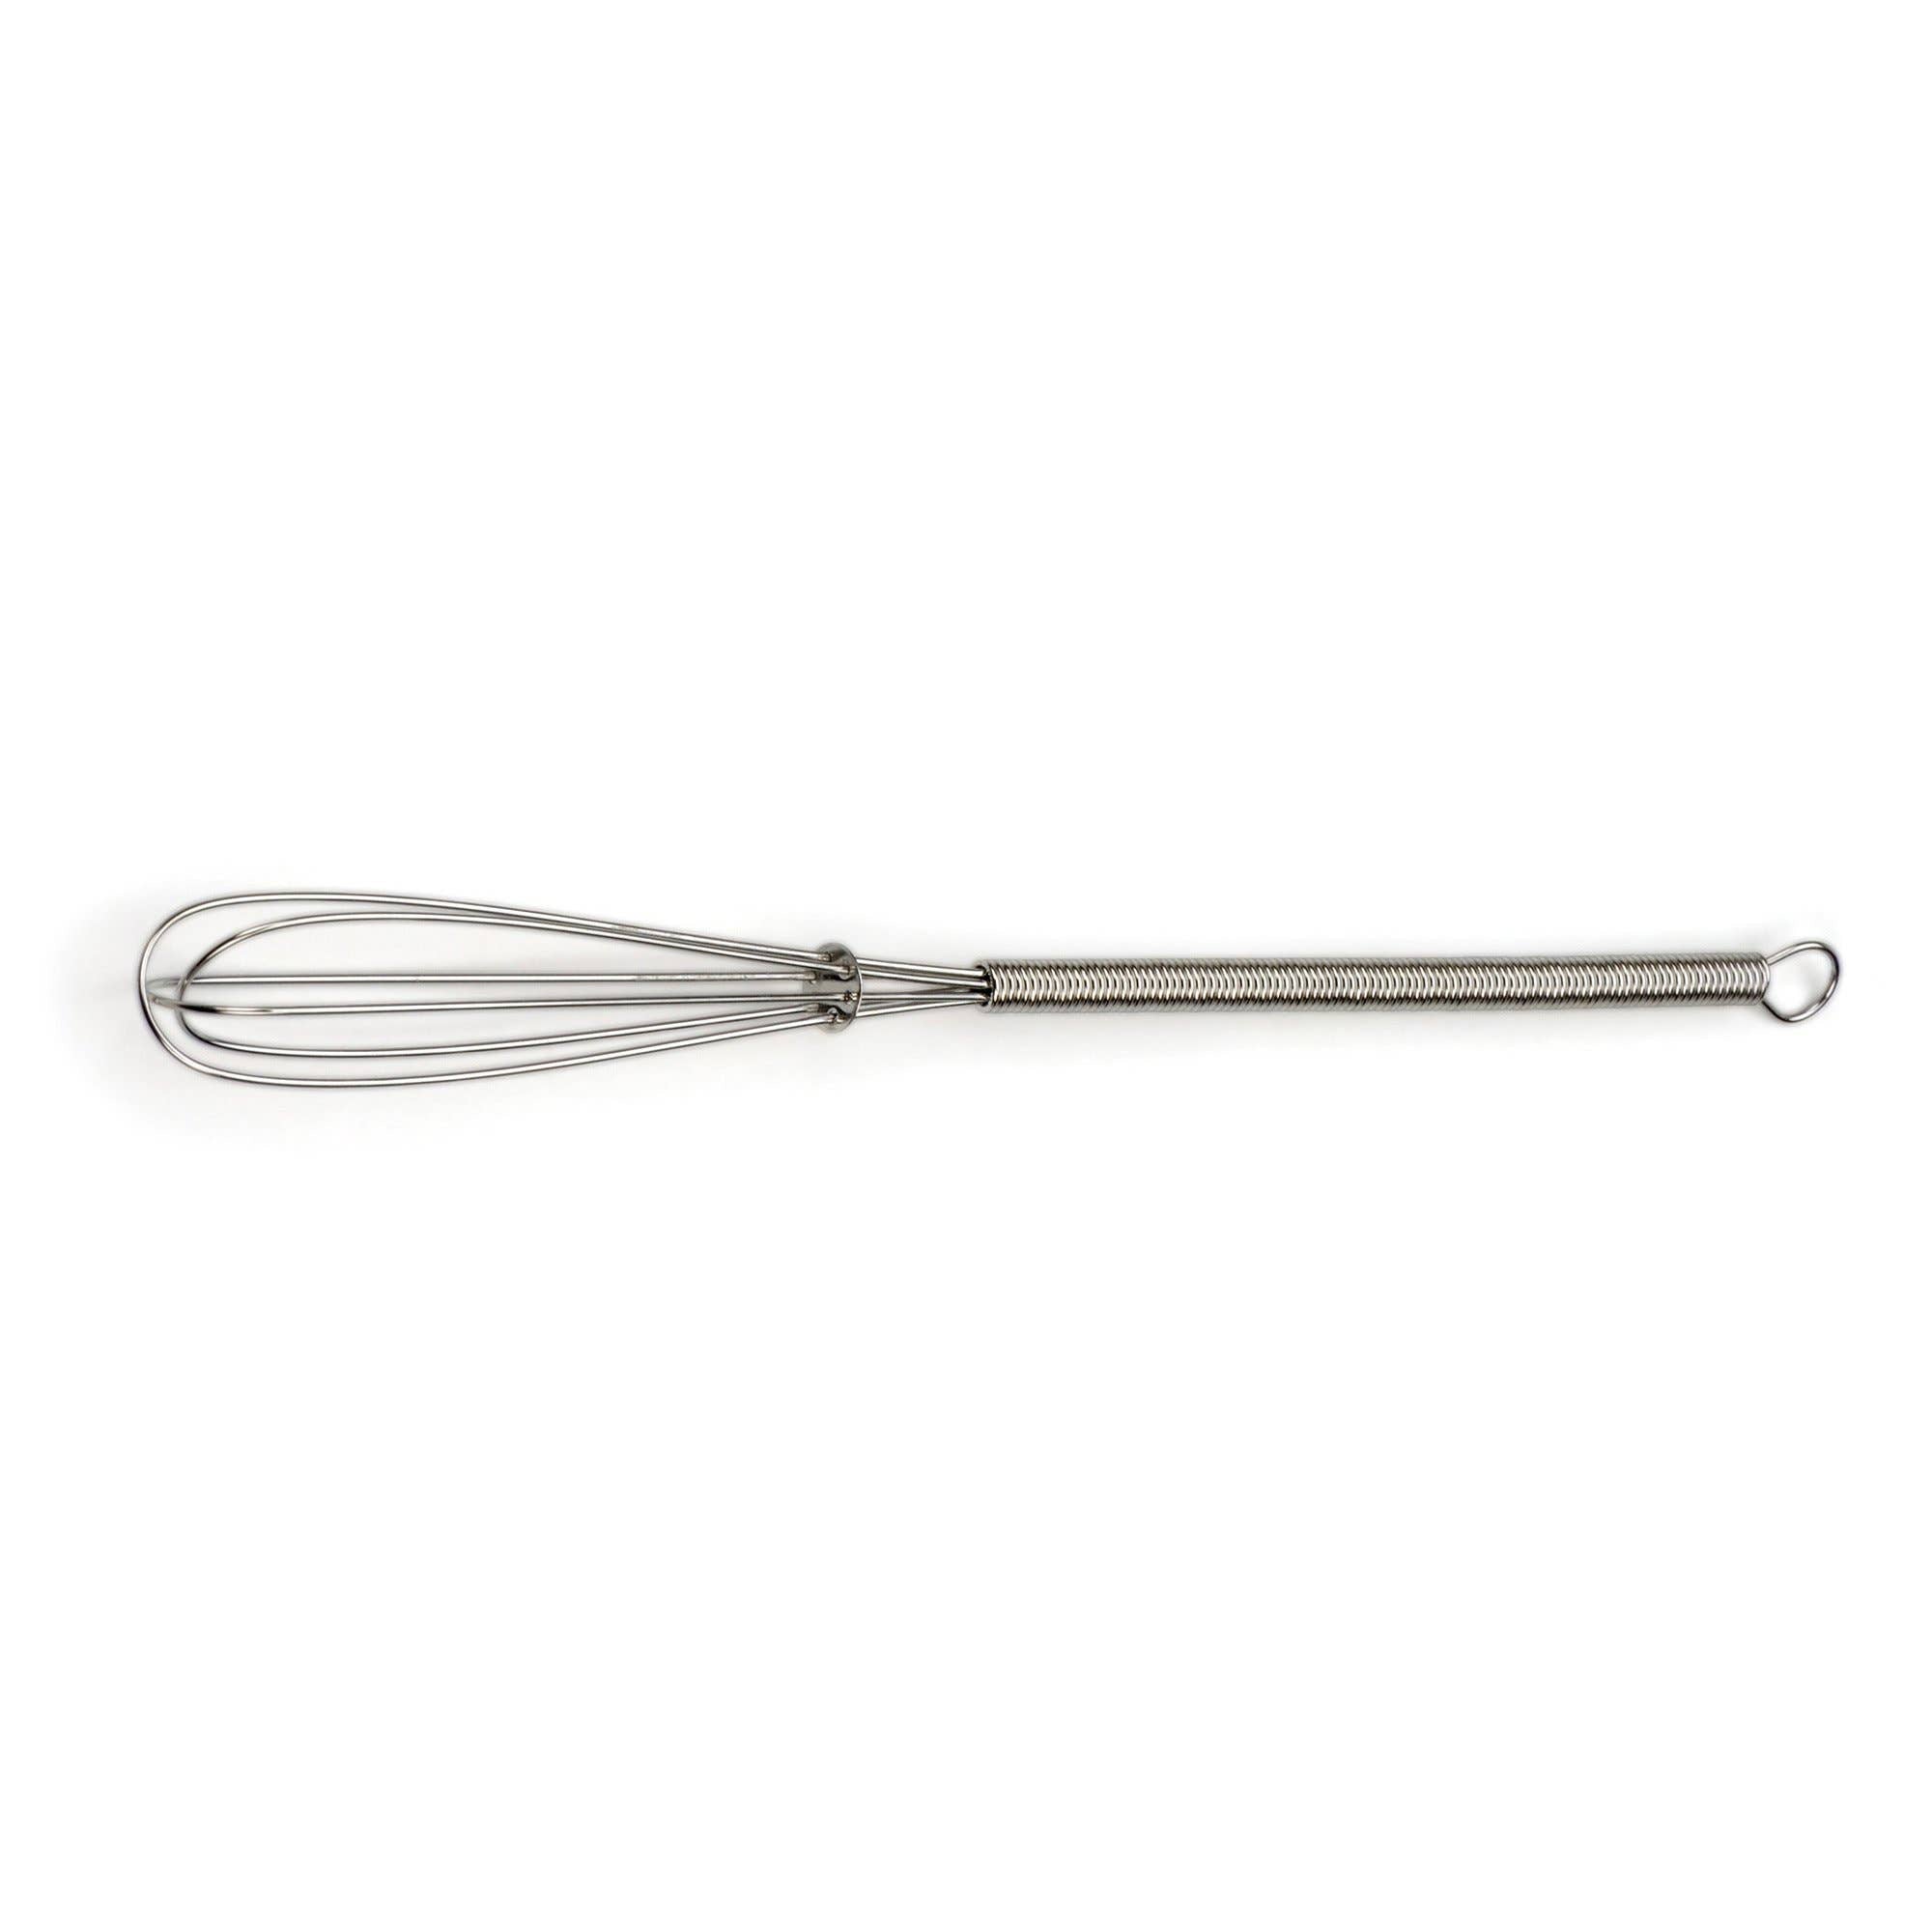 Mini Whisk - 9 inch long handle whisk